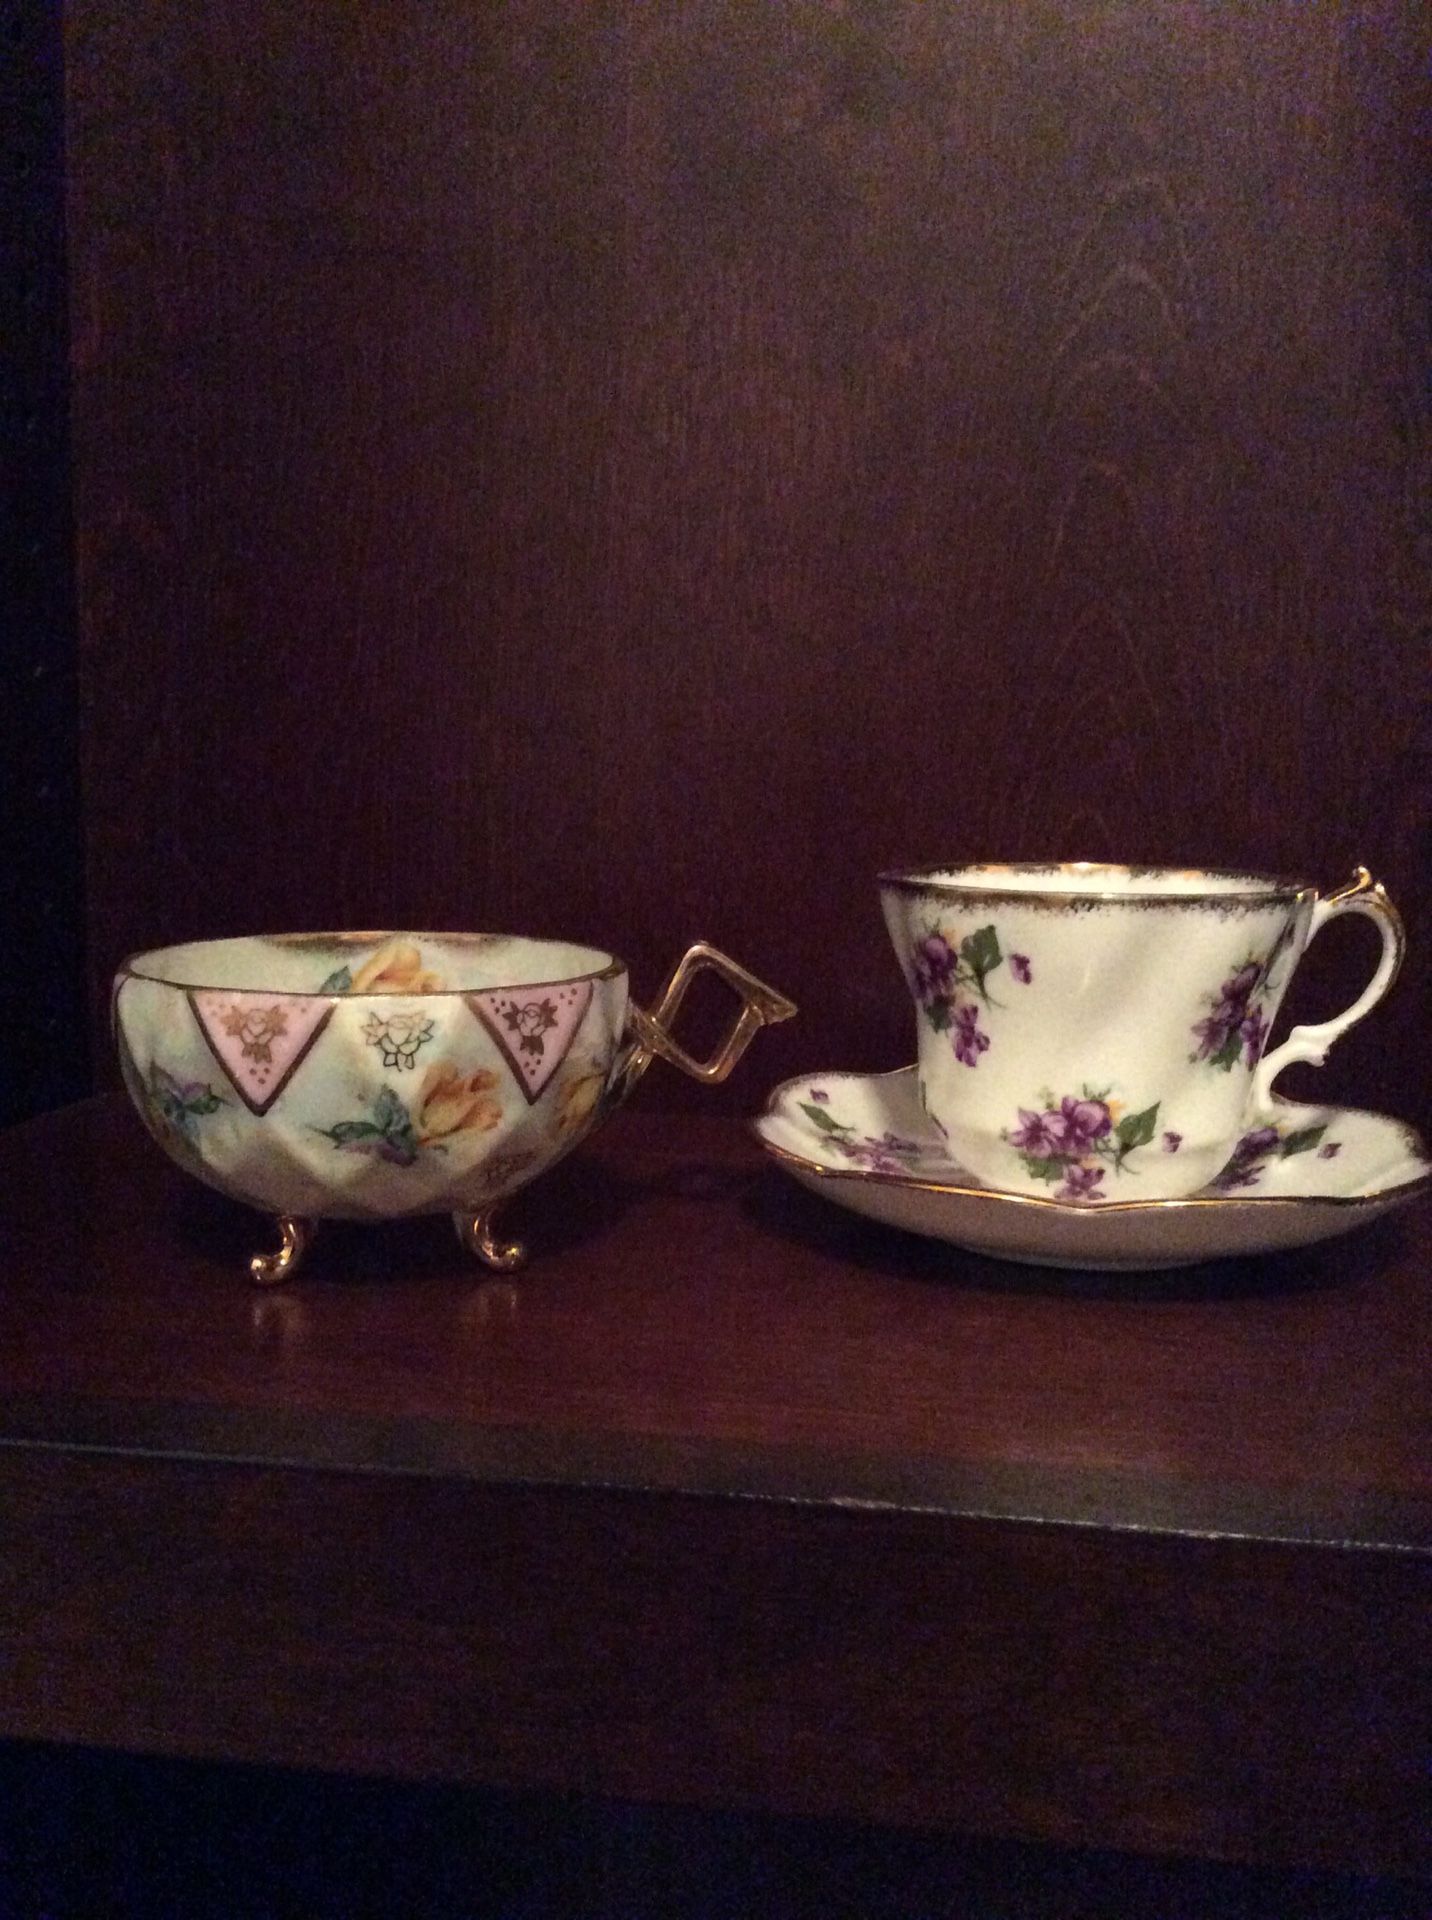 REDUCED! Antique teacups $4 ea, $7 for both